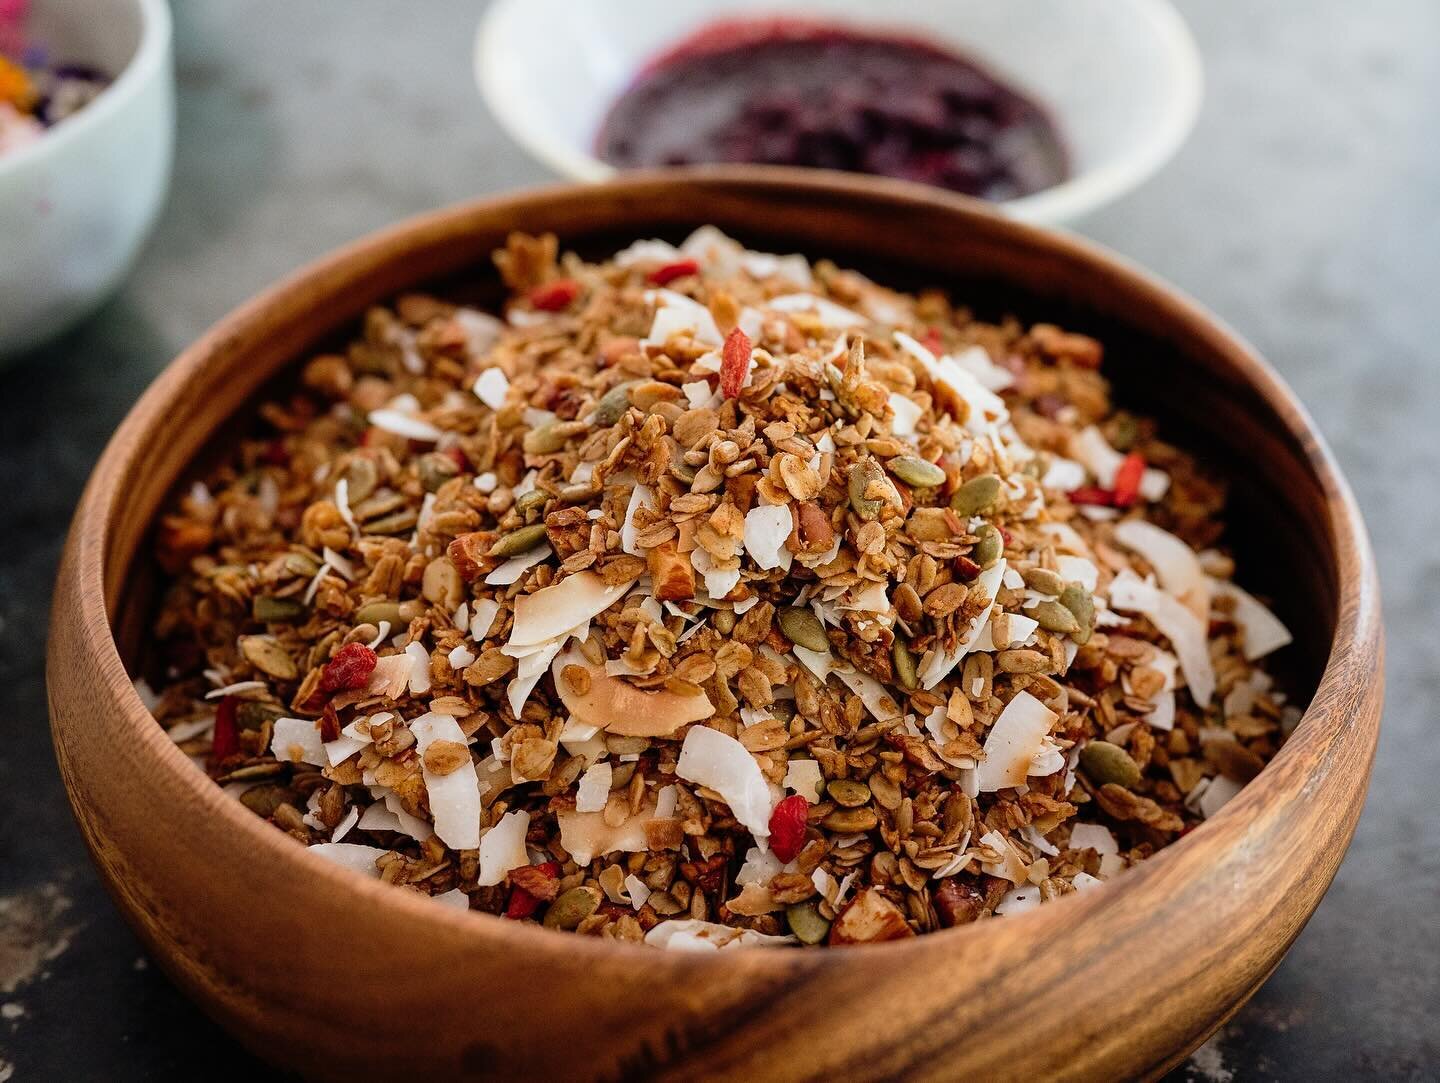 Homemade Crunchy Granola Bliss

What&rsquo;s your favourite way to eat granola? I love mine with frozen organic berries that I warm up or defrost overnight in the fridge and Greek yoghurt. One of my favourite summer breakfasts. Lots of berries, a big